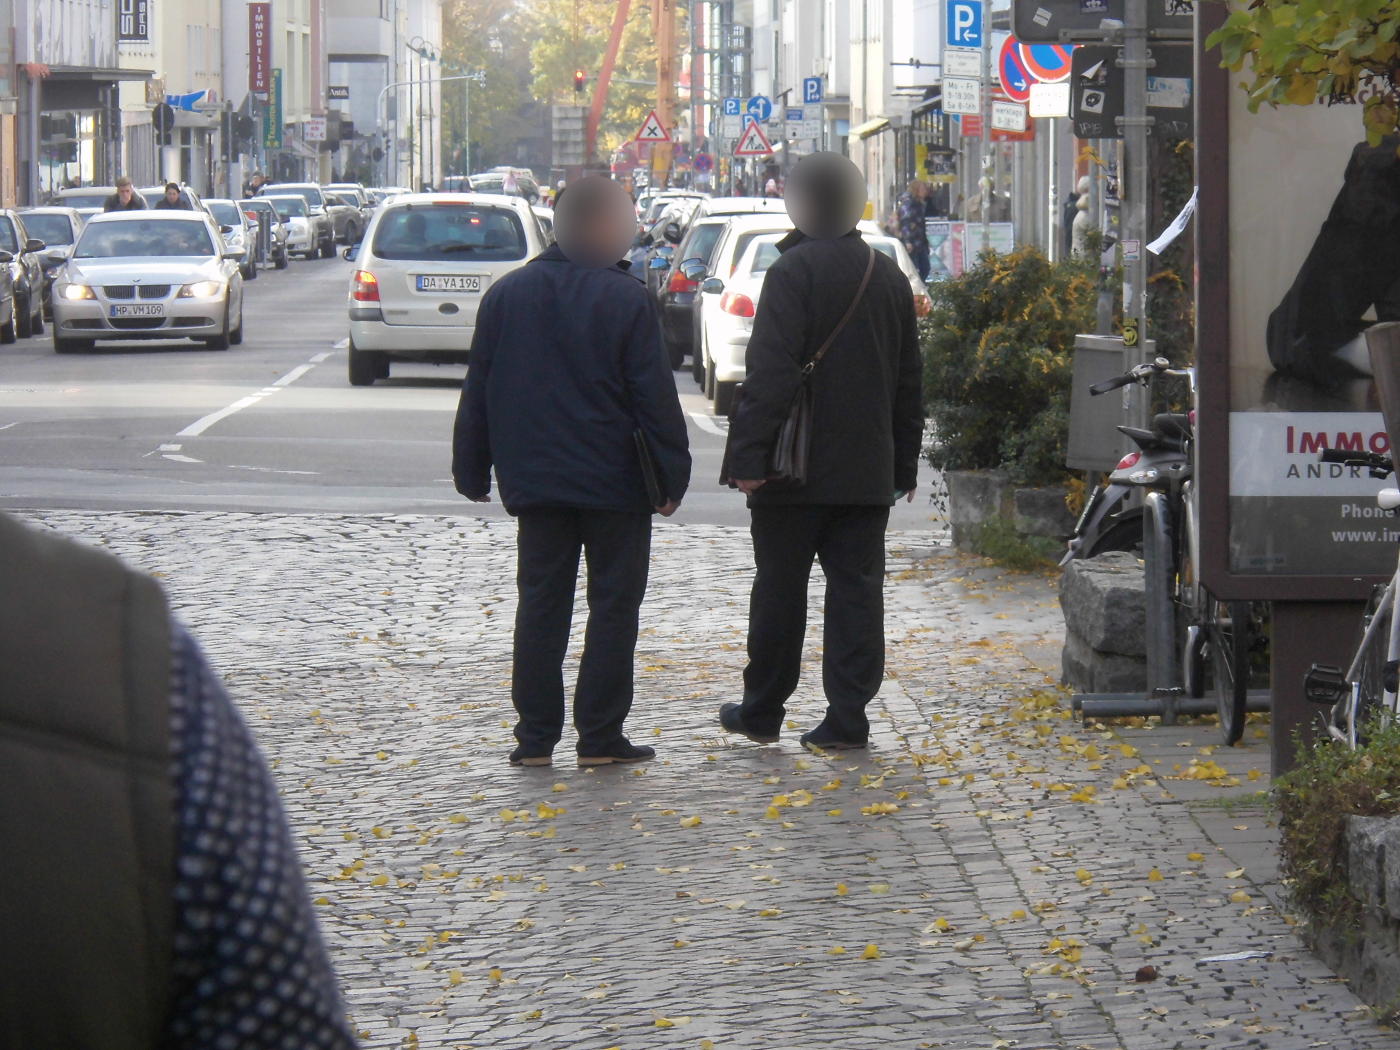 Darmstadt: Jehovah's Witnesses different: more naive